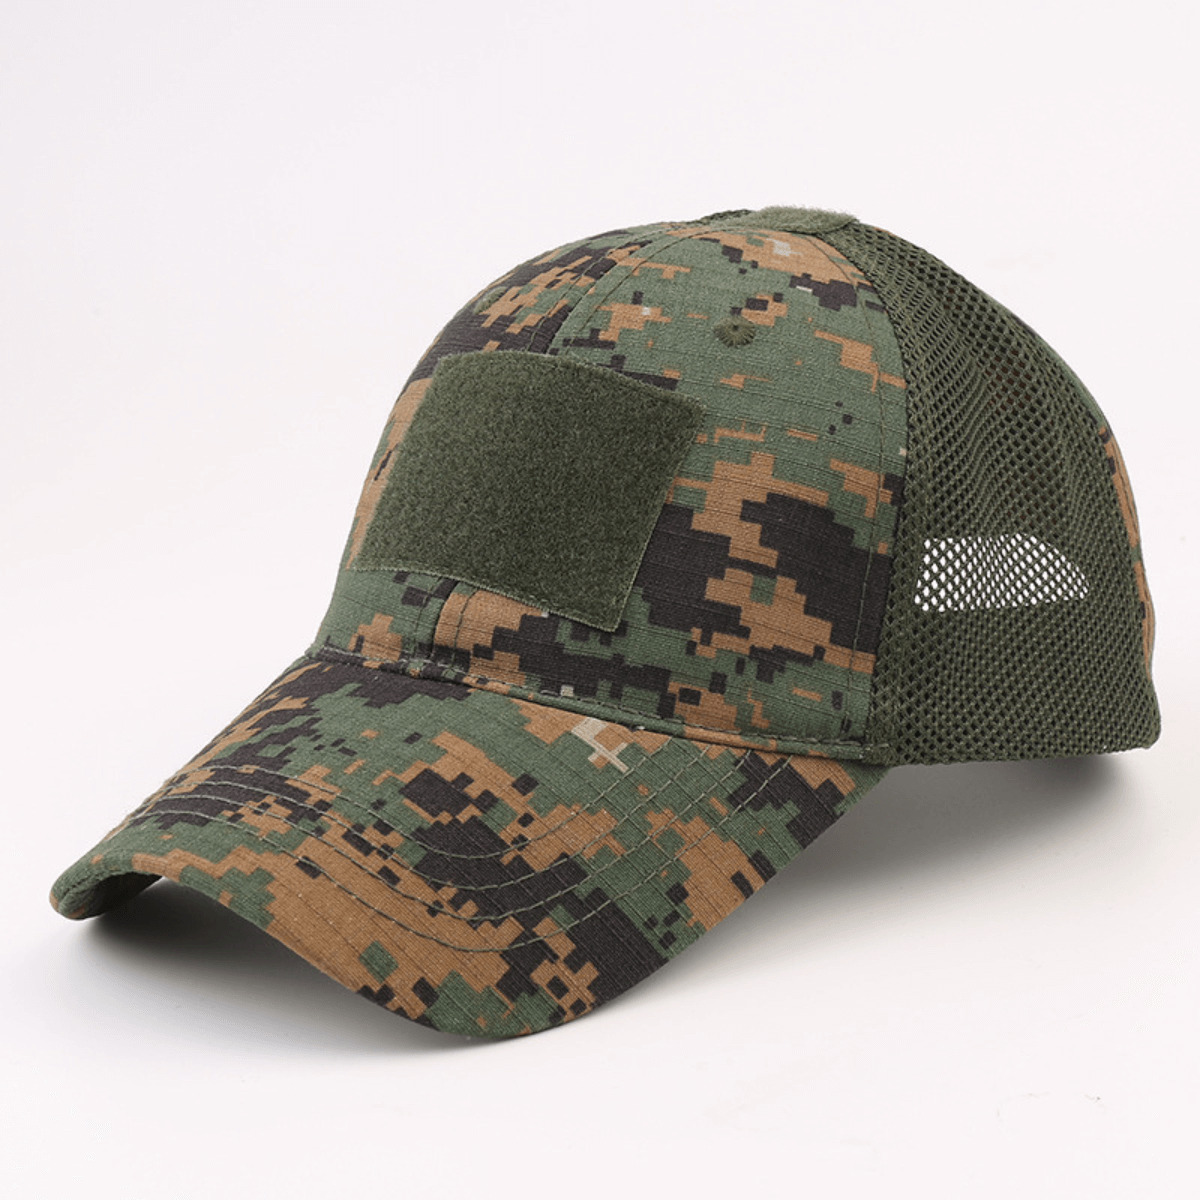 Tactical-Style Patch Hat With Adjustable Strap - BDU Digital